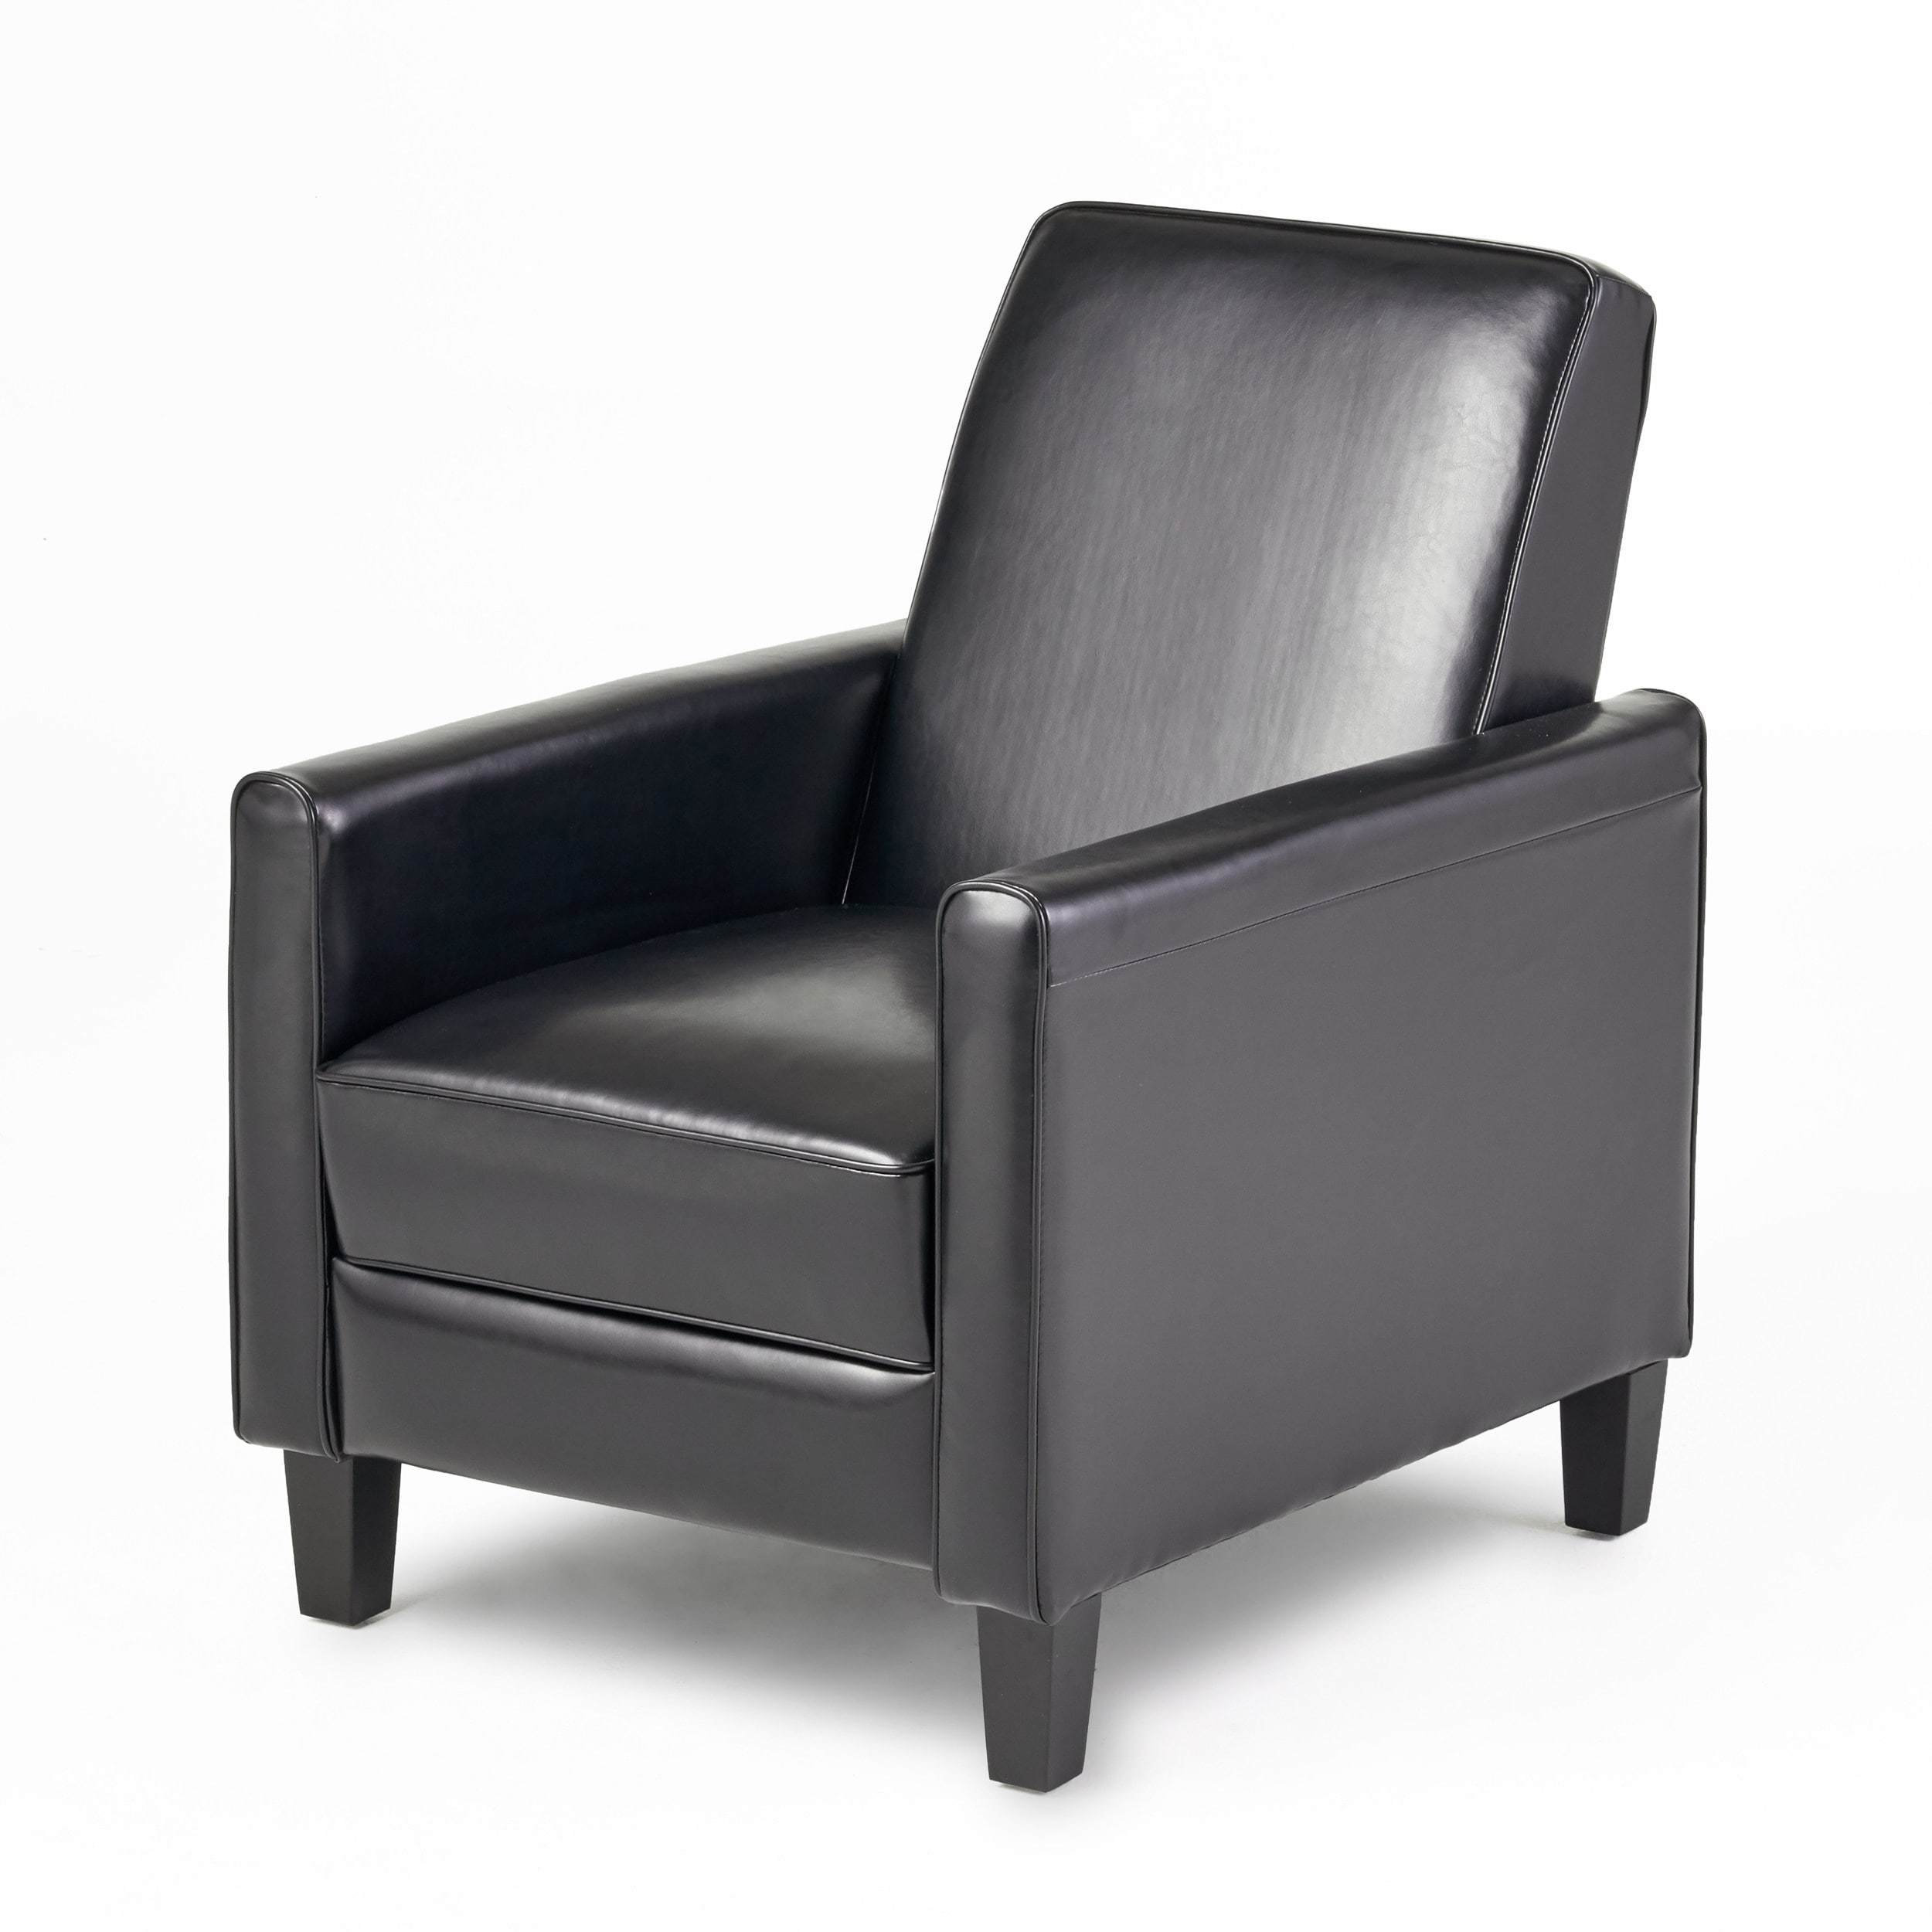 Darvis Black Bonded Leather Recliner Club Chair By Christopher Knight Home